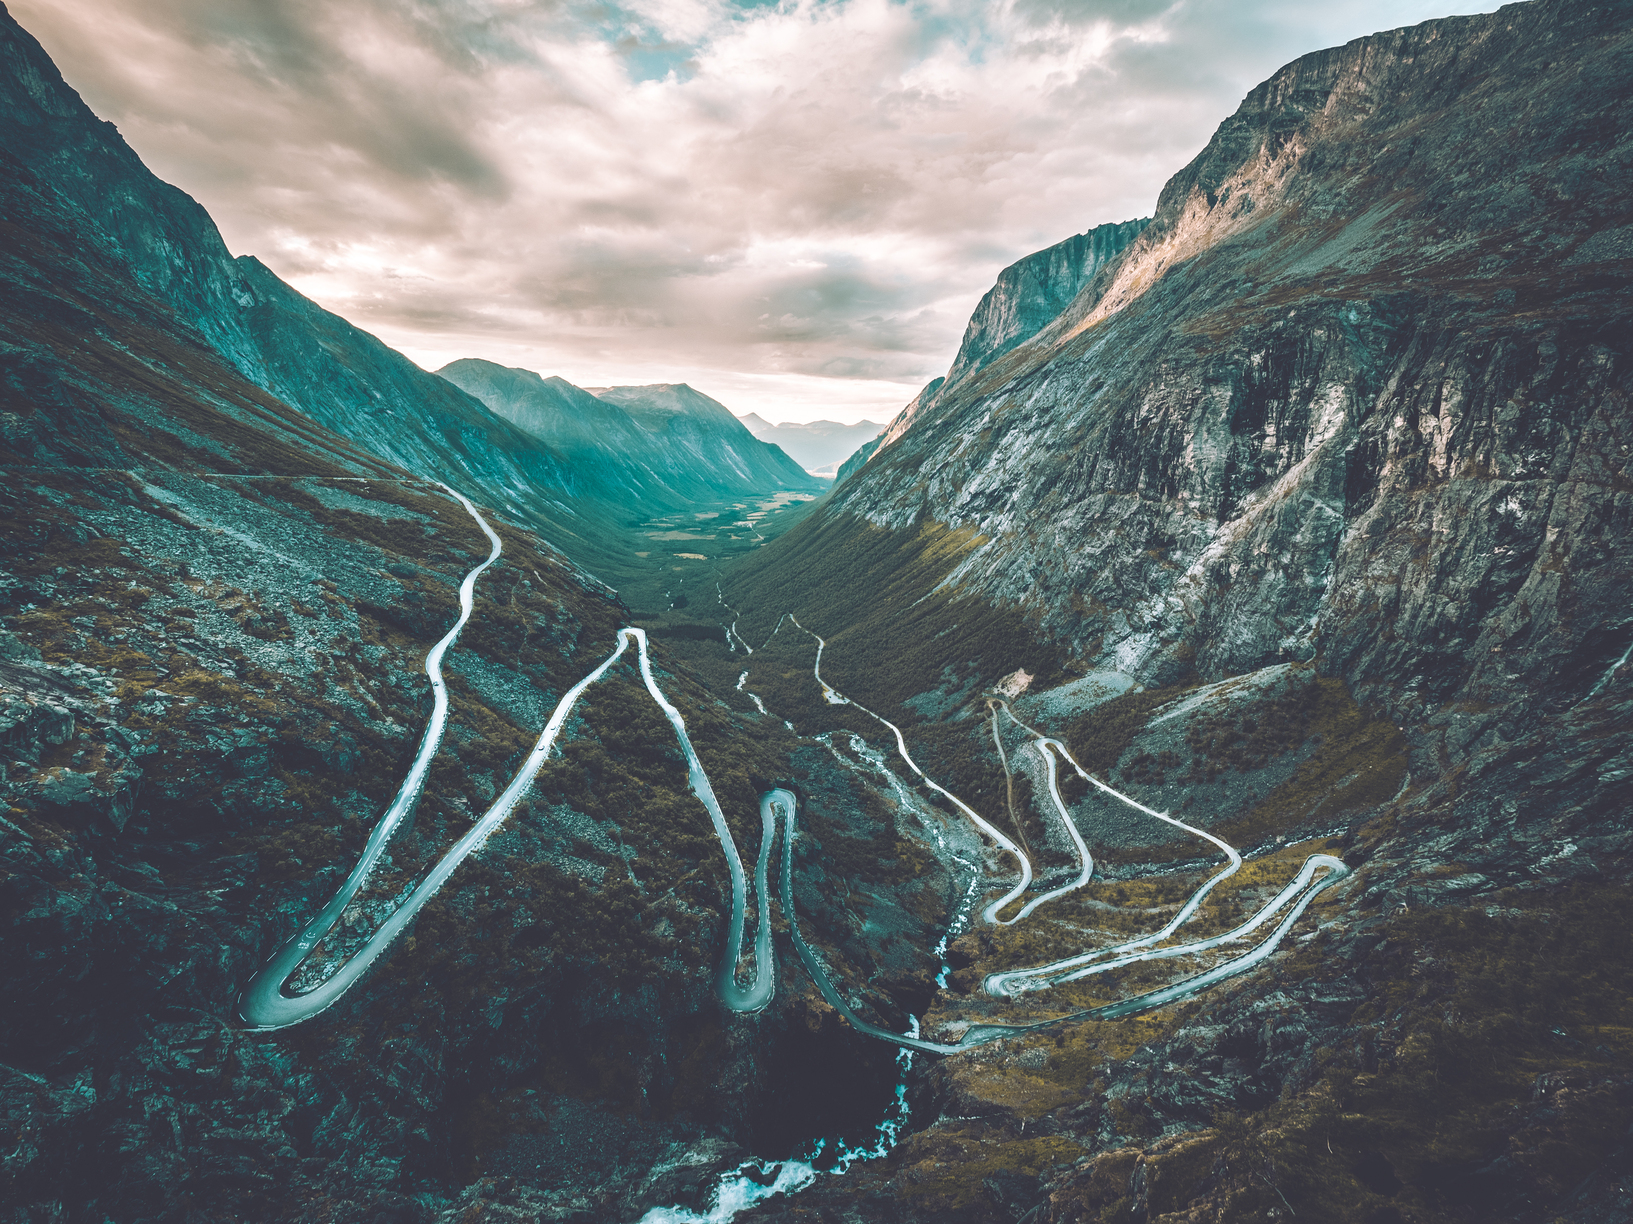 "Trollstigen, or the Troll's Path, is a winding mountain road in Norway known for its stunning views and hairpin turns. This image captures the rugged beauty of the Norwegian landscape and the majesty of the mountains surrounding Trollstigen." "Experience the awe-inspiring beauty of Trollstigen in Norway with this breathtaking image. The winding road, towering peaks, and lush greenery all come together to create a truly unforgettable scene." "Looking for adventure and natural beauty? Look no further than Trollstigen in Norway! This image showcases the dramatic landscape of the region, including the steep cliffs, plunging valleys, and winding mountain road."